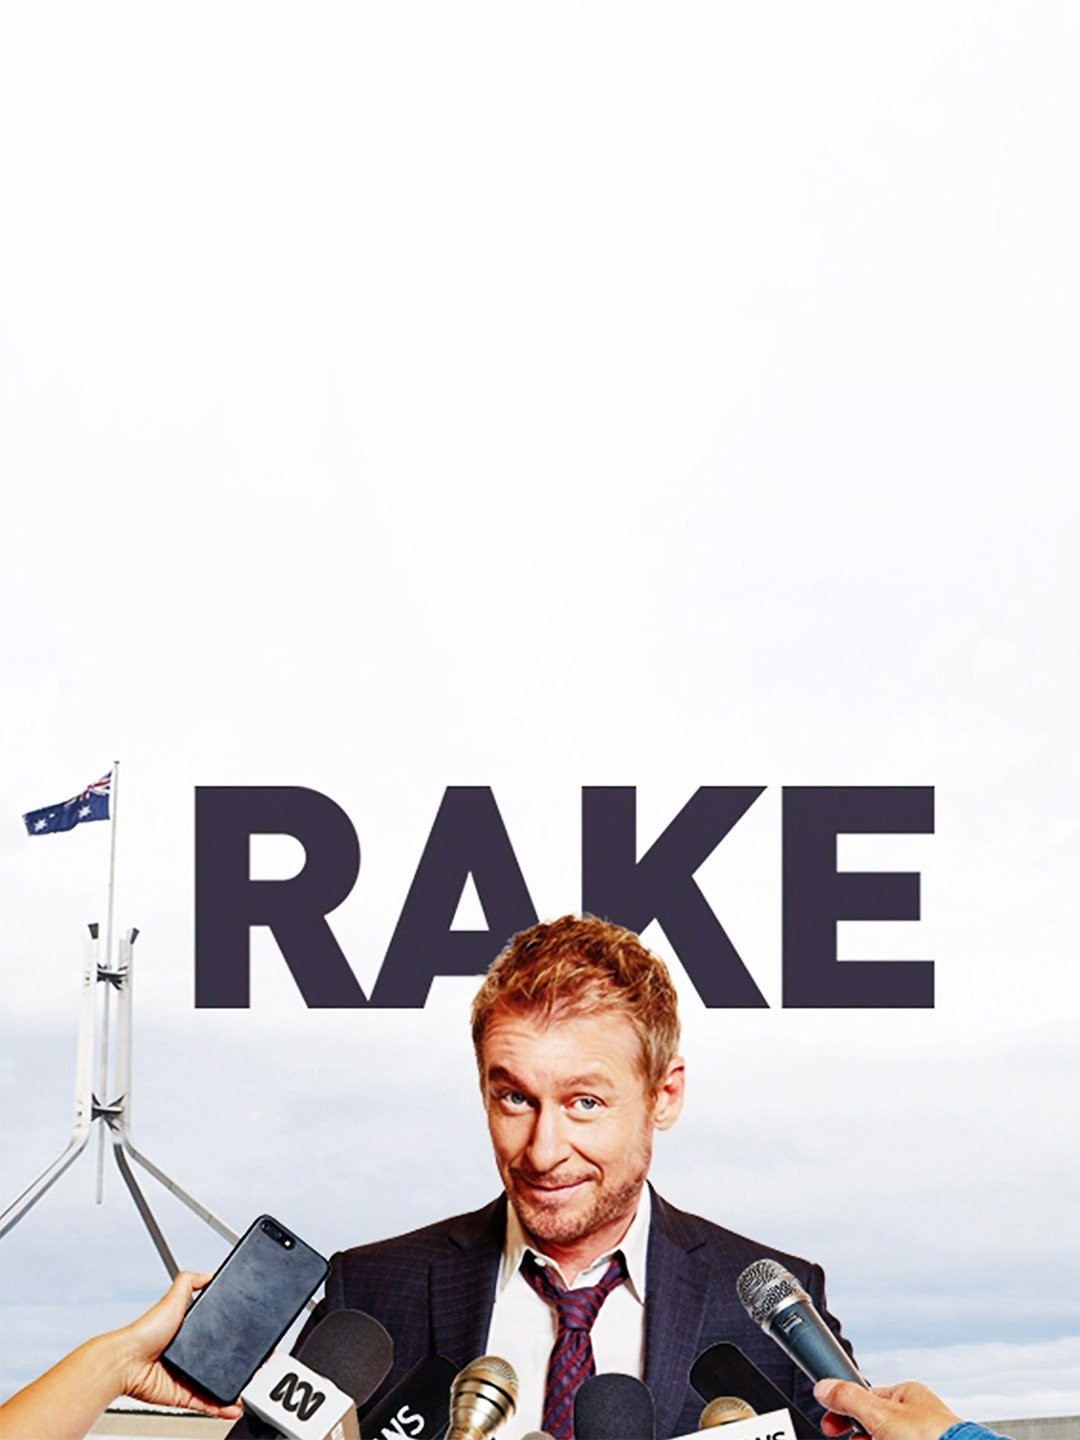 the rake - Scary Story And Show Review